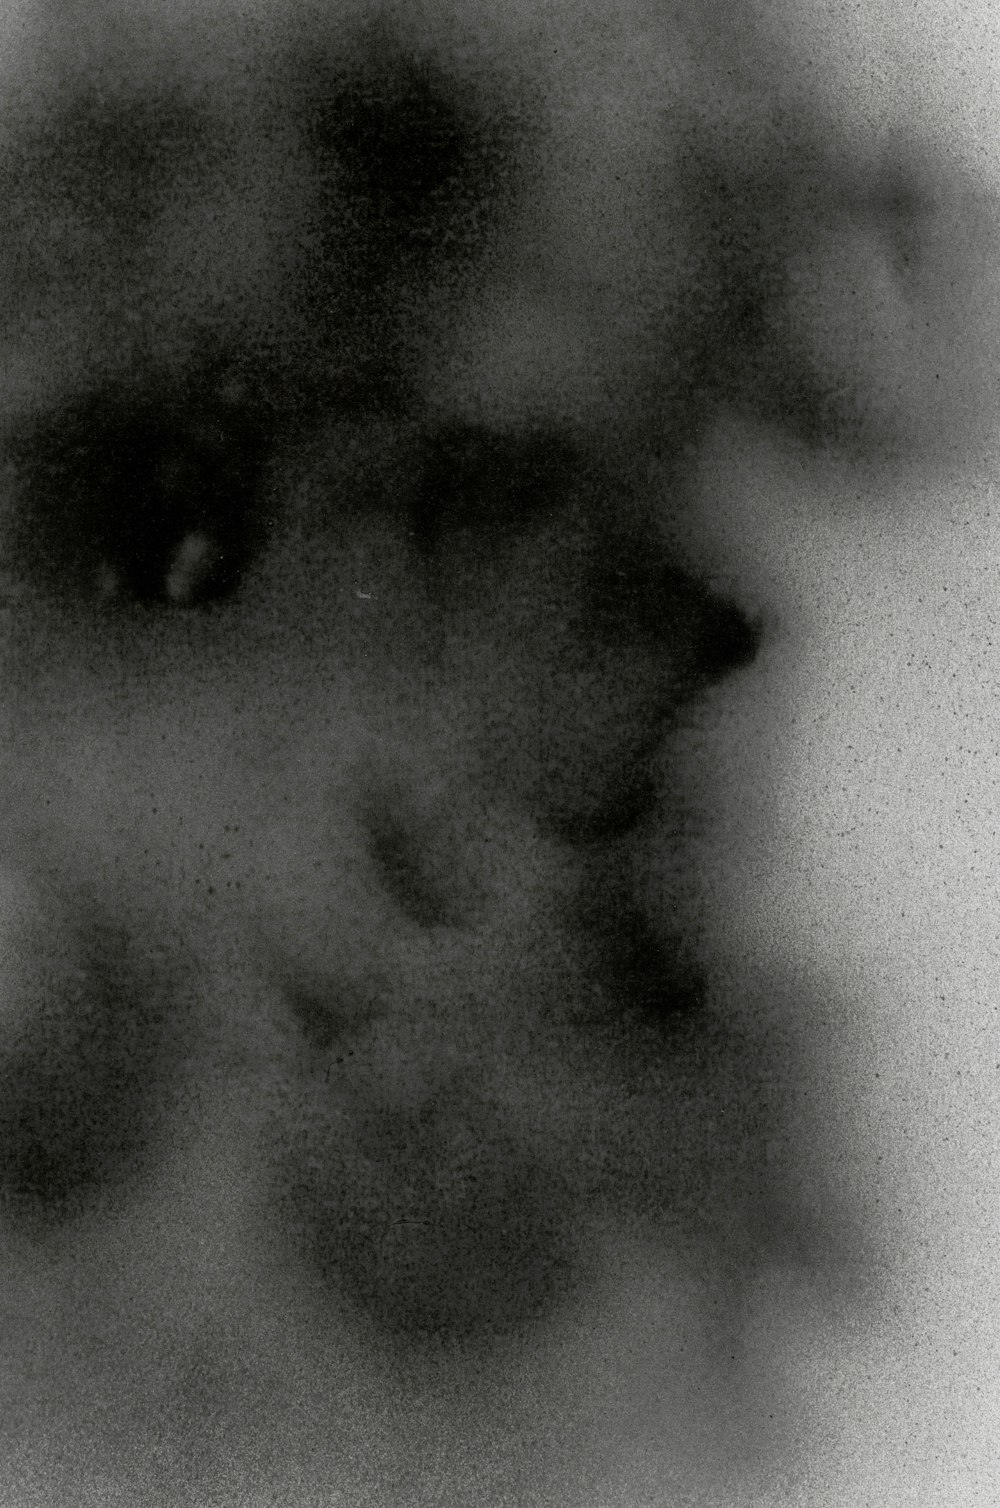 a blurry image of a black and white photo